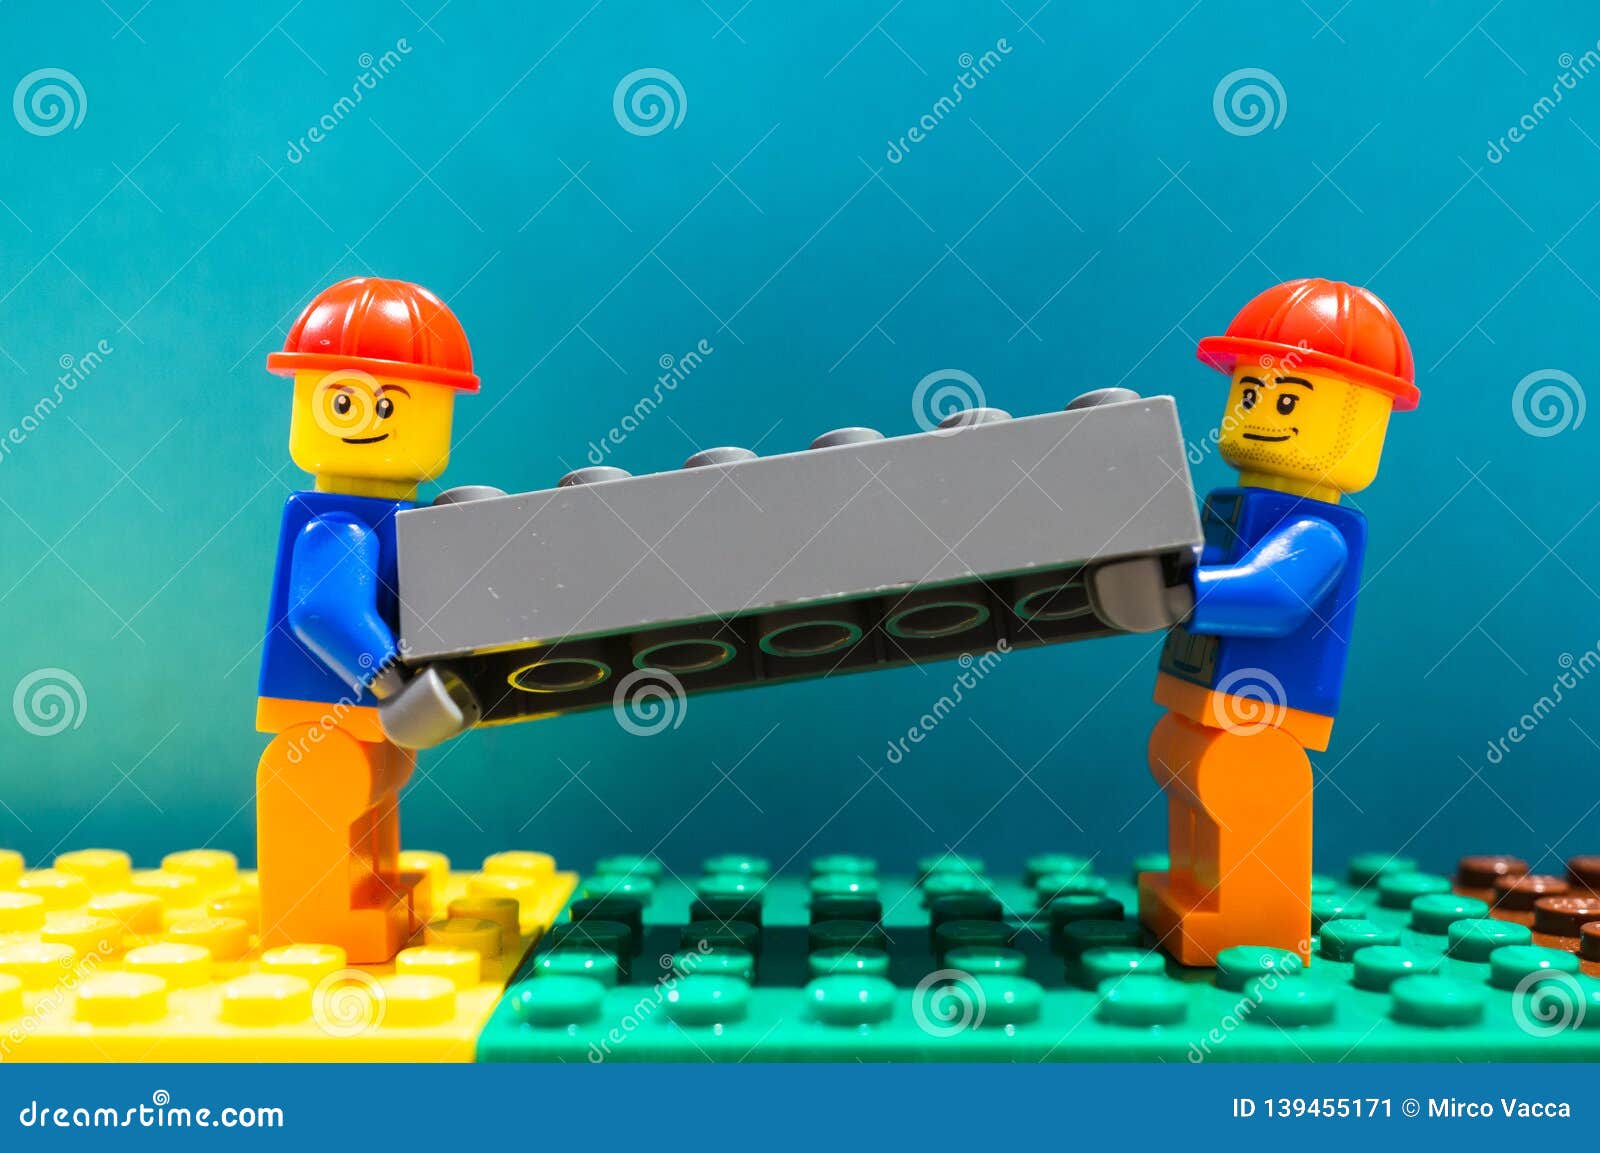 Lego Construction Workers Editorial Photo Image Of Construction 139455171 Enjoy the hd lego, cartoon, art clipart. https www dreamstime com lego construction workers poznan poland february two helmet lifting together as team gray plastic brick teamwork very image139455171